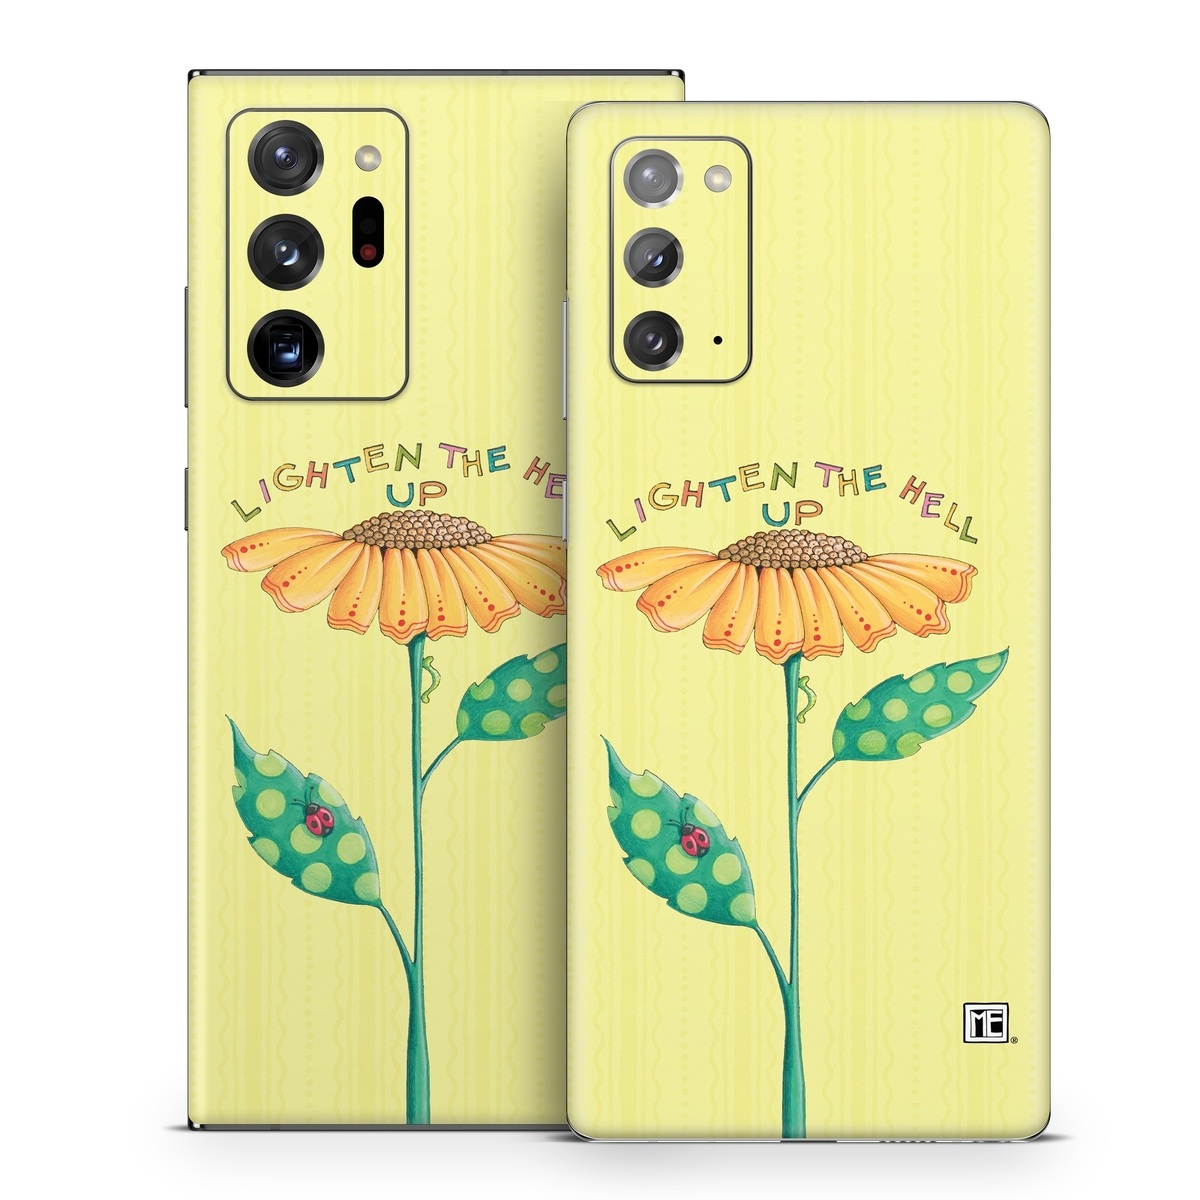 Samsung Galaxy Note 20 Series Skin design of Flower, Plant, Botany, Flowering plant, Illustration, Wildflower, Daisy family, Coneflower, Pedicel, with yellow, green, red, black, orange, blue colors